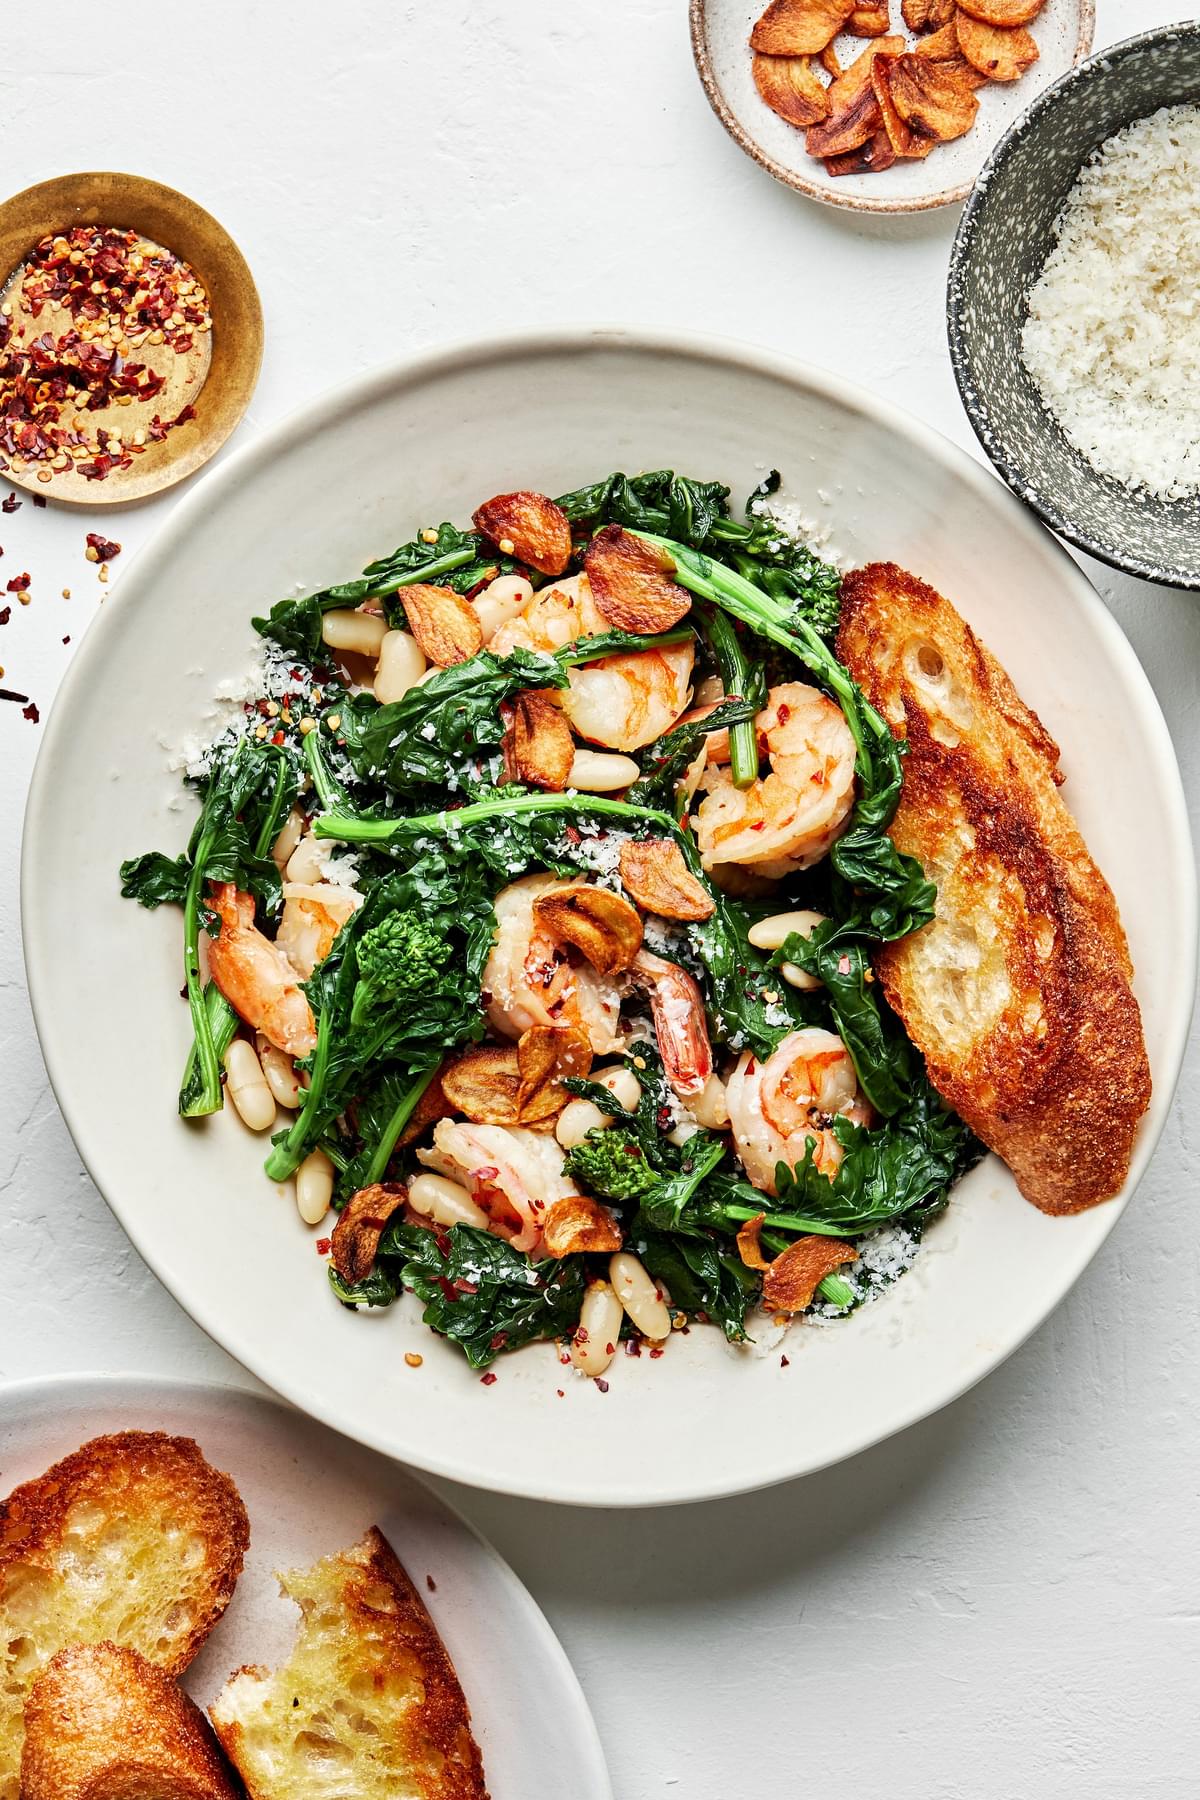 spicy broccoli rabe with white beans and shrimp in a bowl served with crusty bread